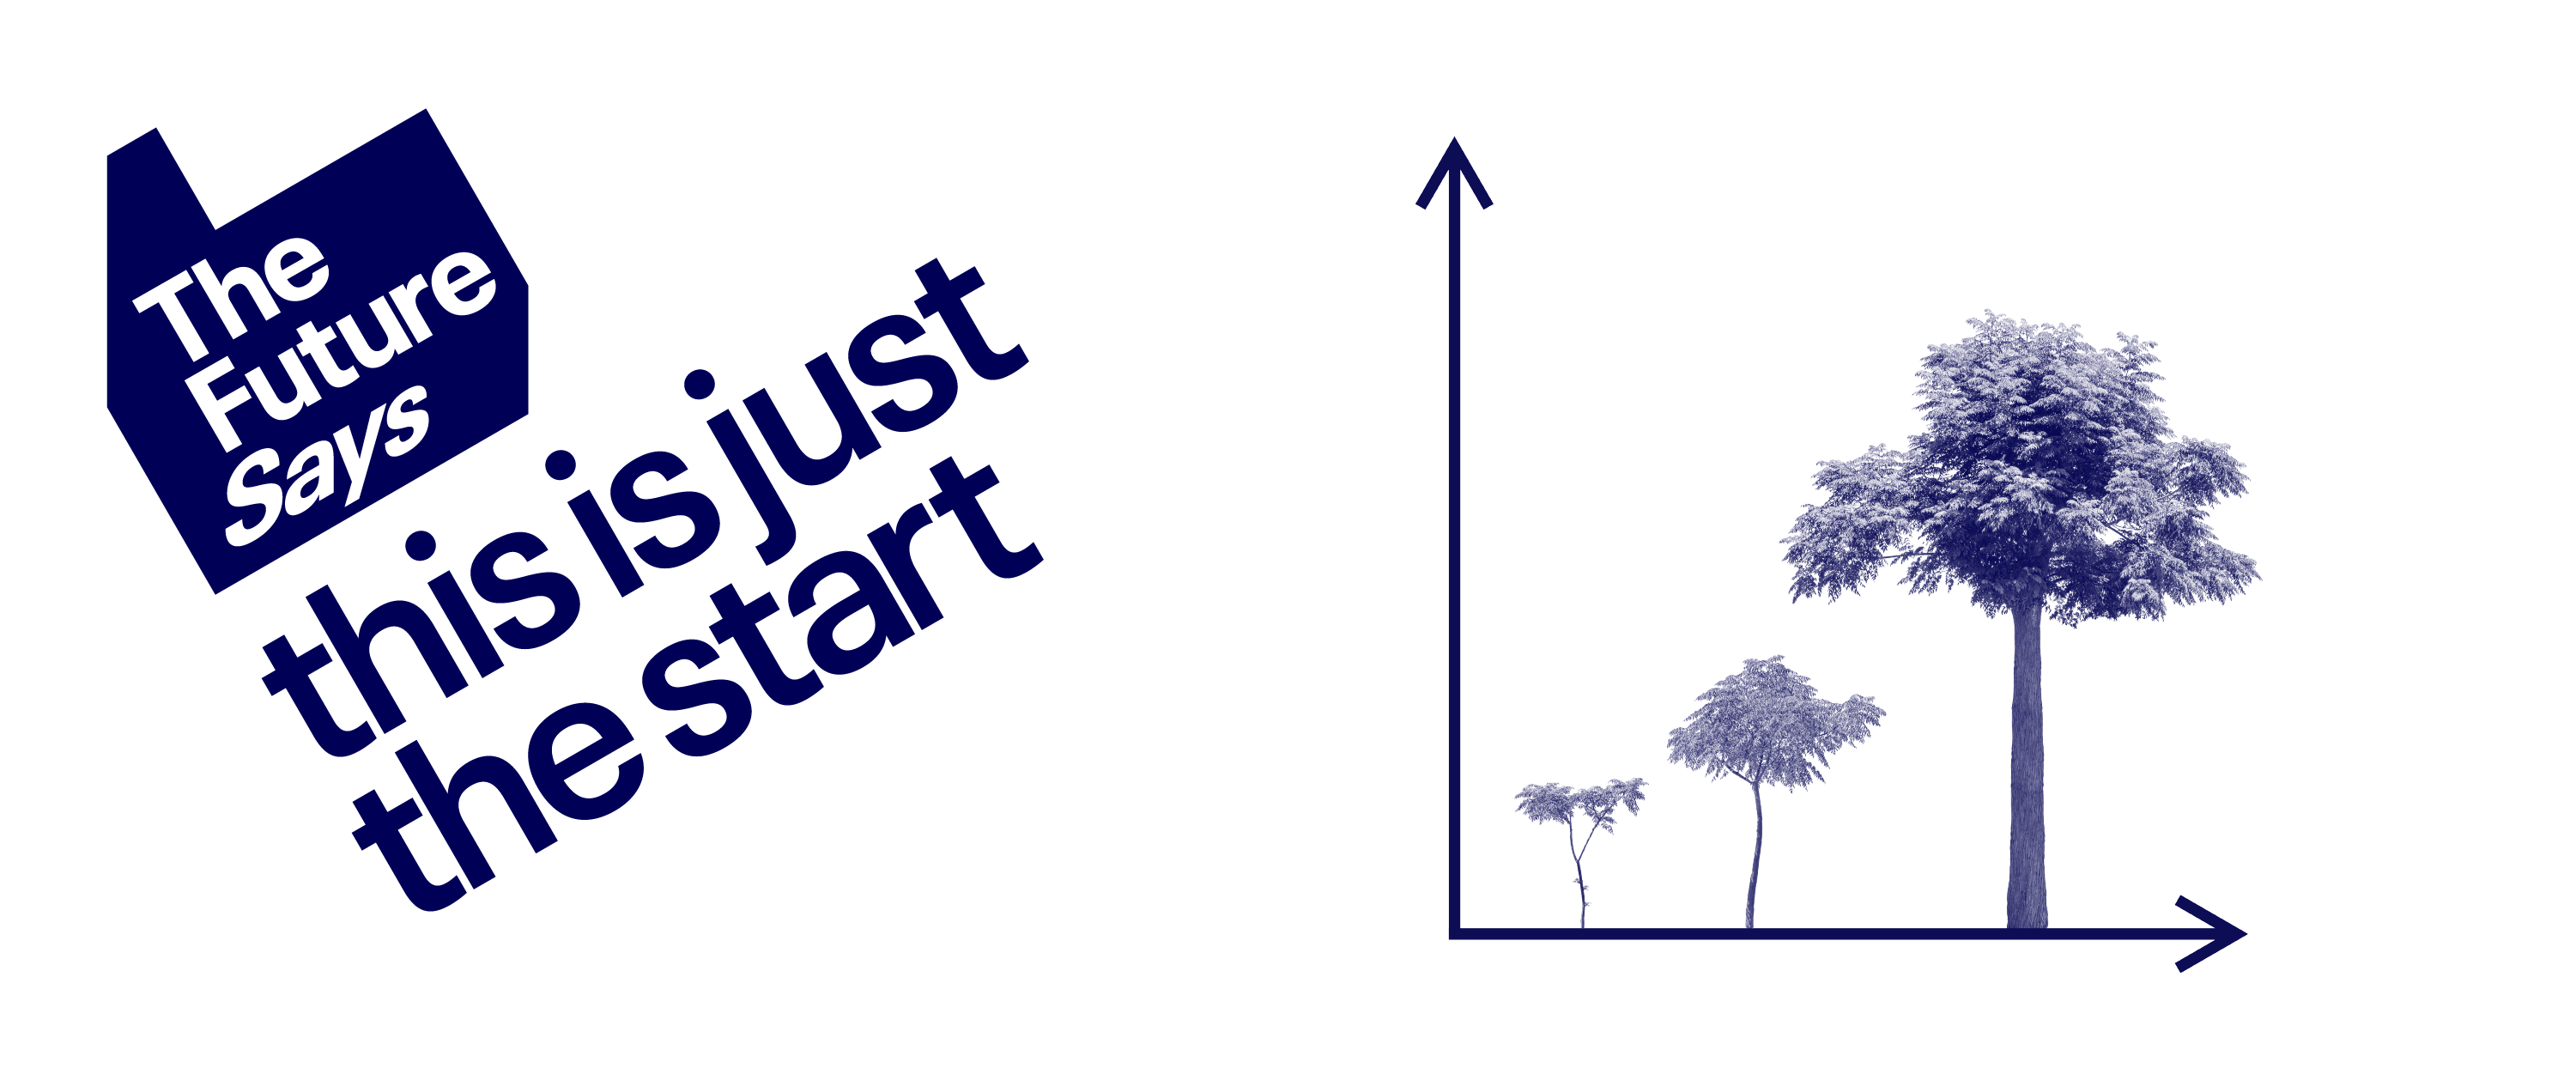 A graph showing trees growing with the text 'The Future Says this is just the start'